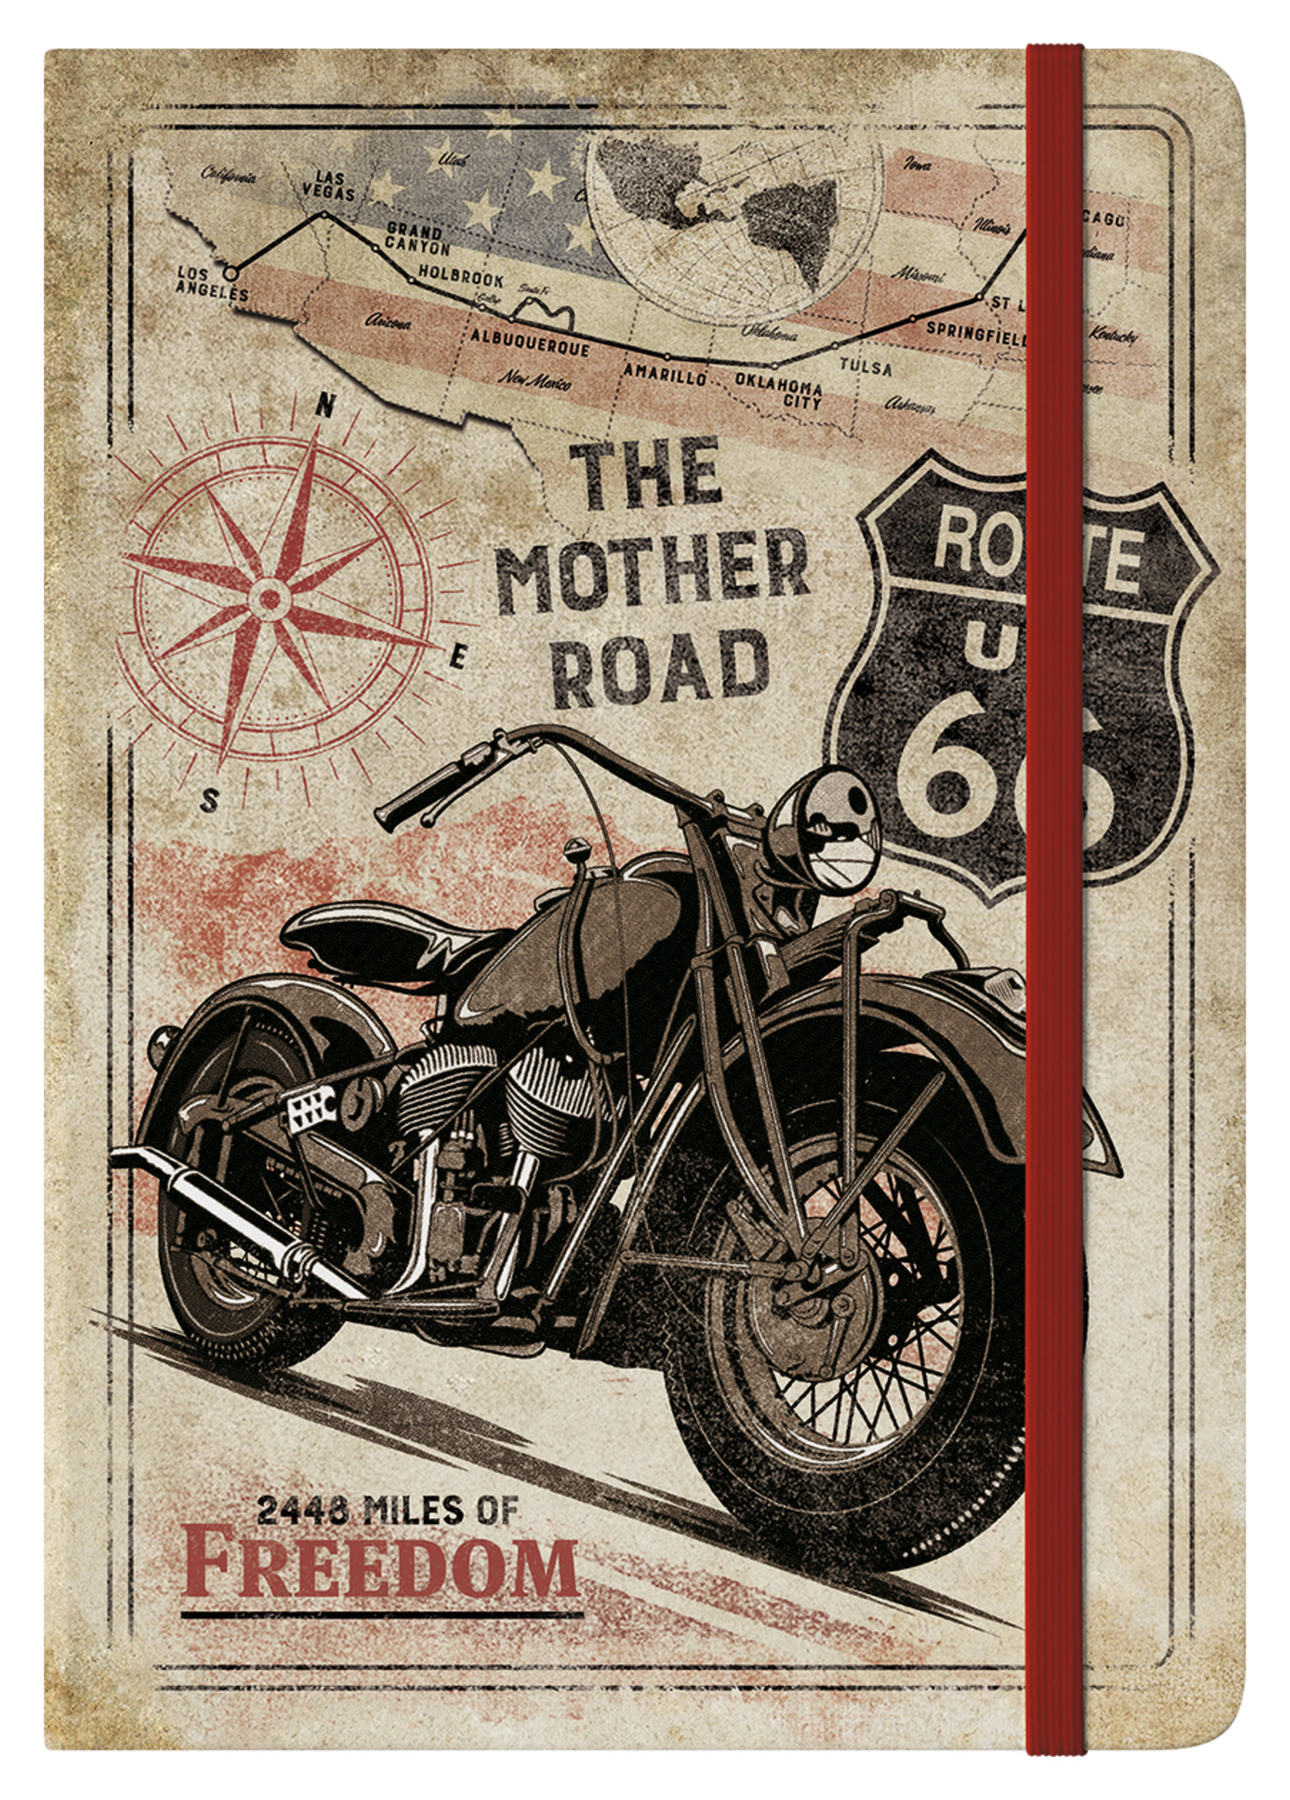 ROUTE 66 Mother Road BIKER MOTORCYCLE PATCH FOR YOUR JACKET OR VEST W/W 